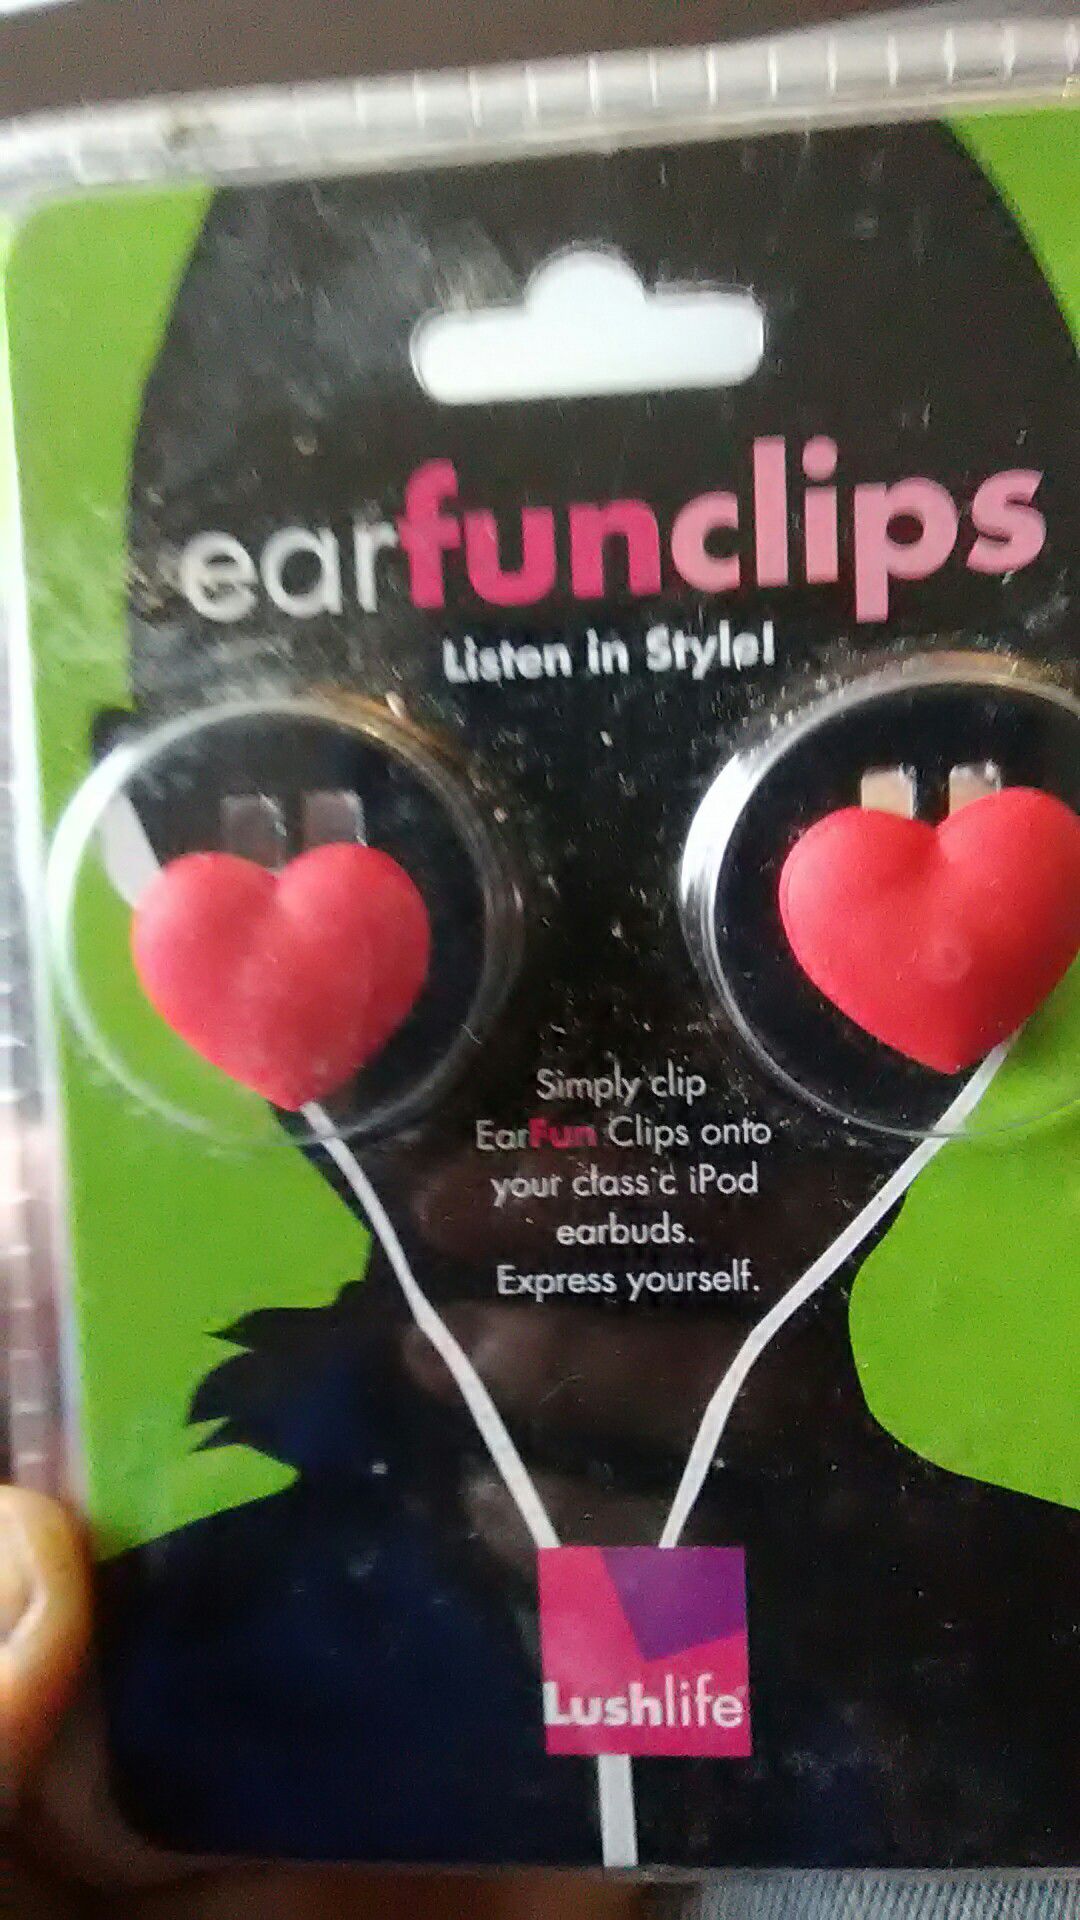 Earbud clips